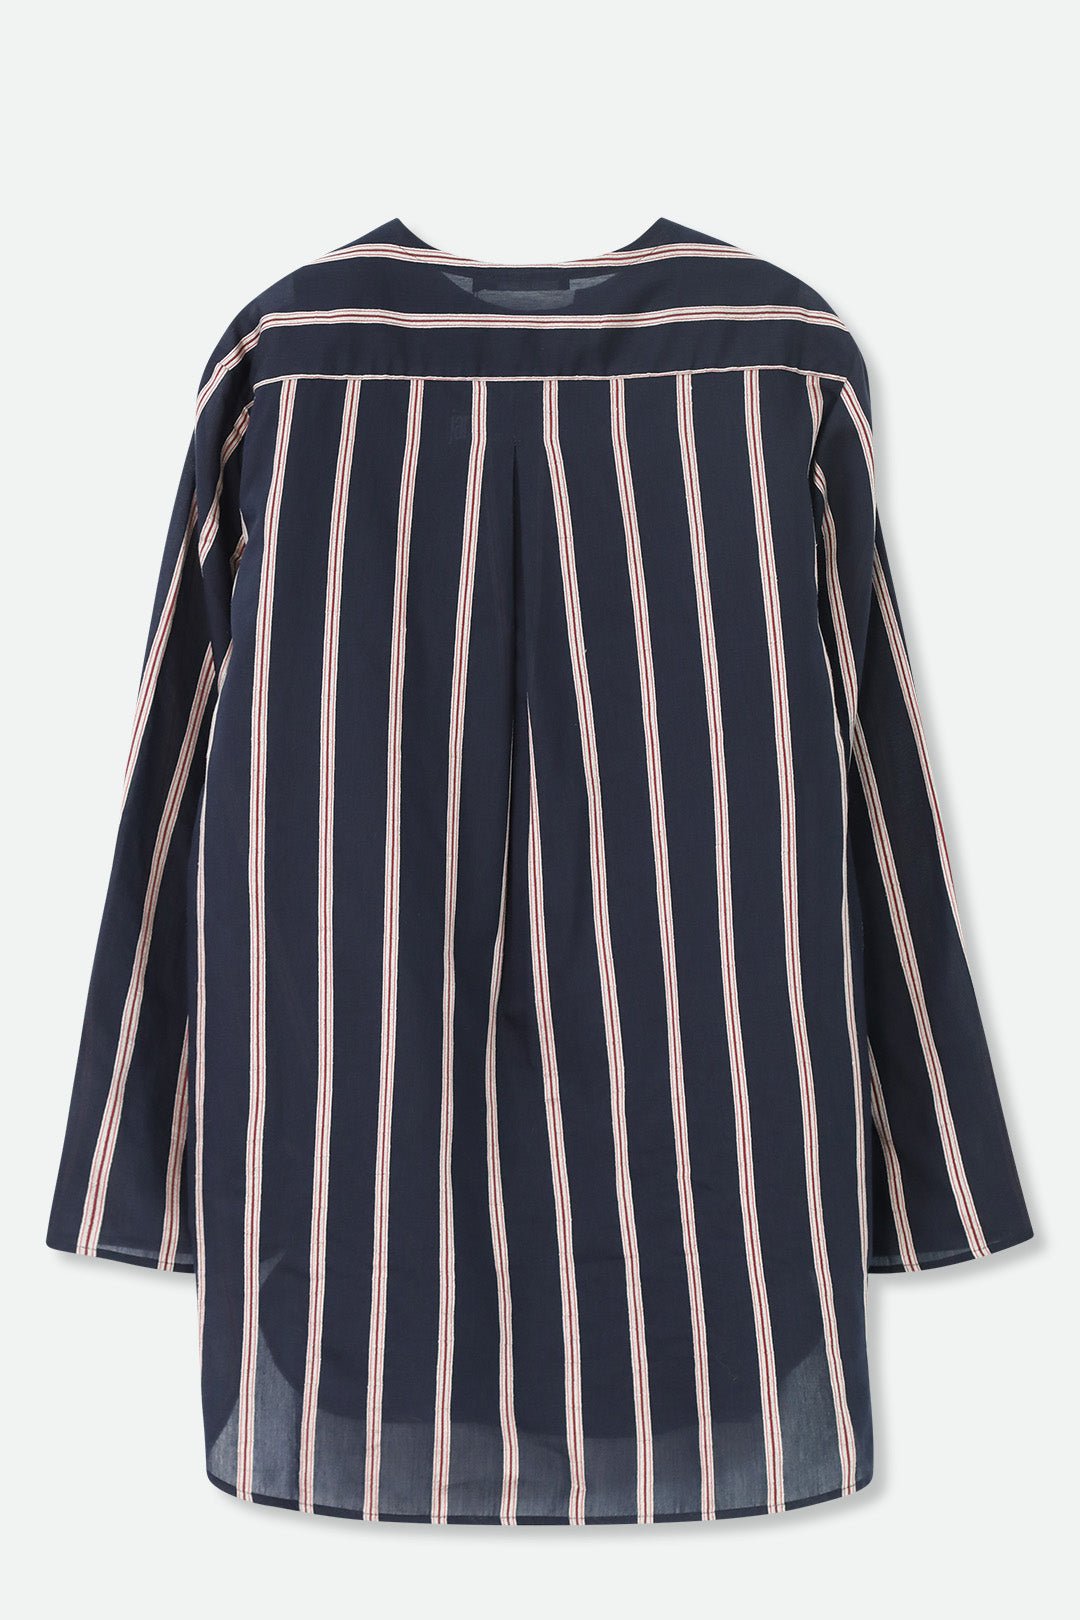 CYPRESS LAYERED SHIRT IN ITALIAN COTTON VOILE NAVY STRIPES - Jarbo